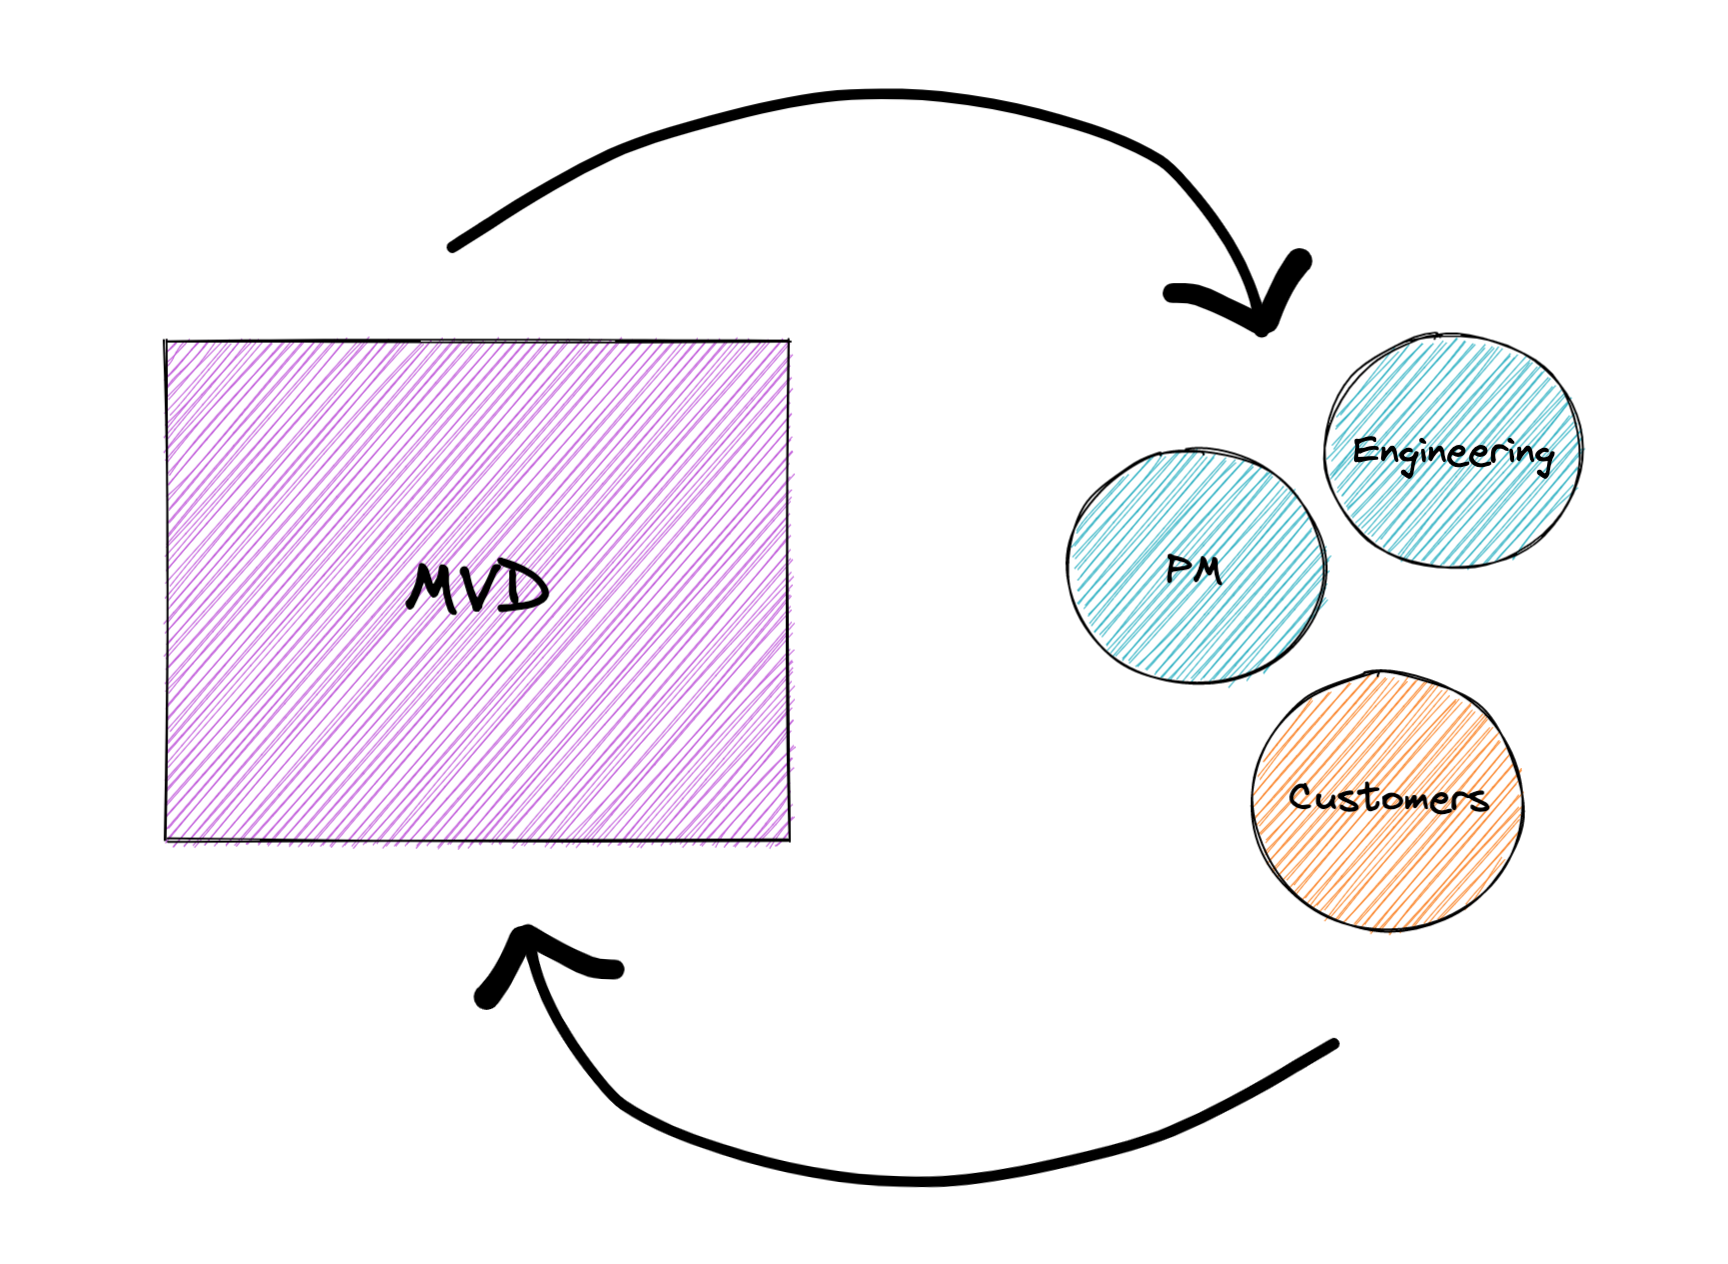 Diagram showing an MVD shaded rectangle with an arrow pointing across to circles with PM, engineering, and customers, then another arrow pointing back to MVD, to emphasize the importance of a feedback loop for your MVD.